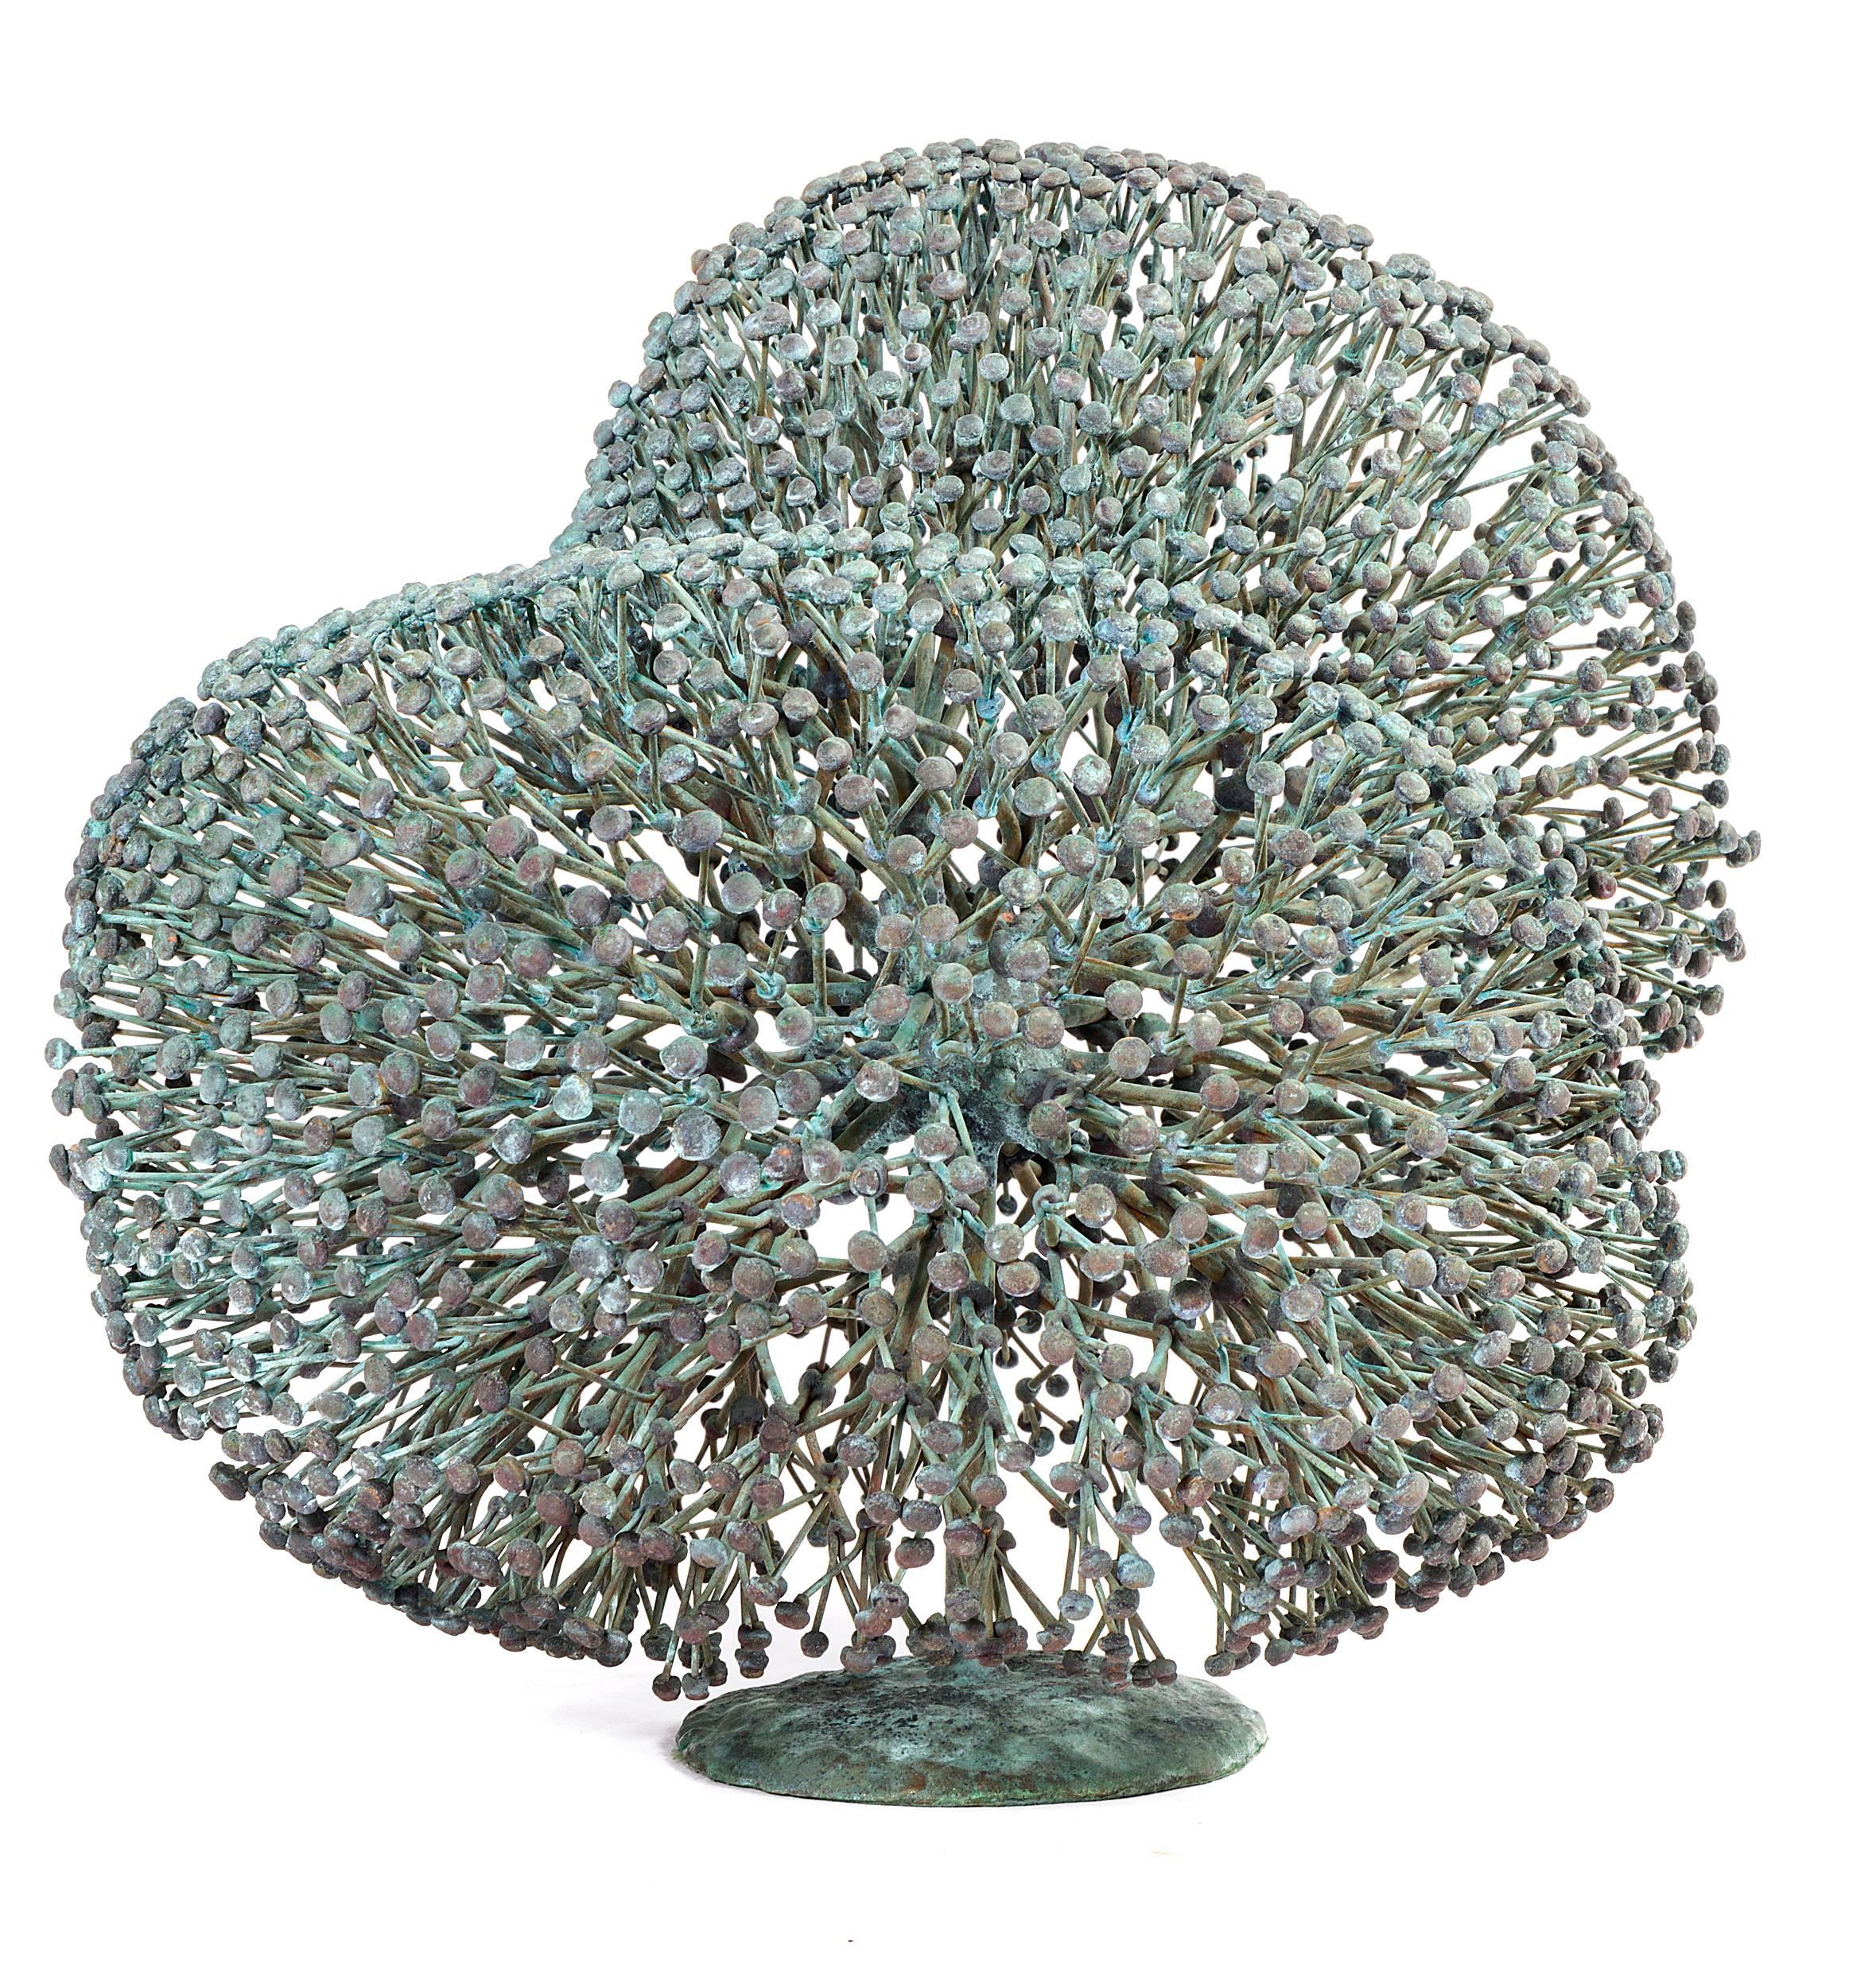 An outstanding example of Bertoia's greatly desired Bush form sculptures. The undulating form is consistent with his skill at creating organic forms and his love of nature.